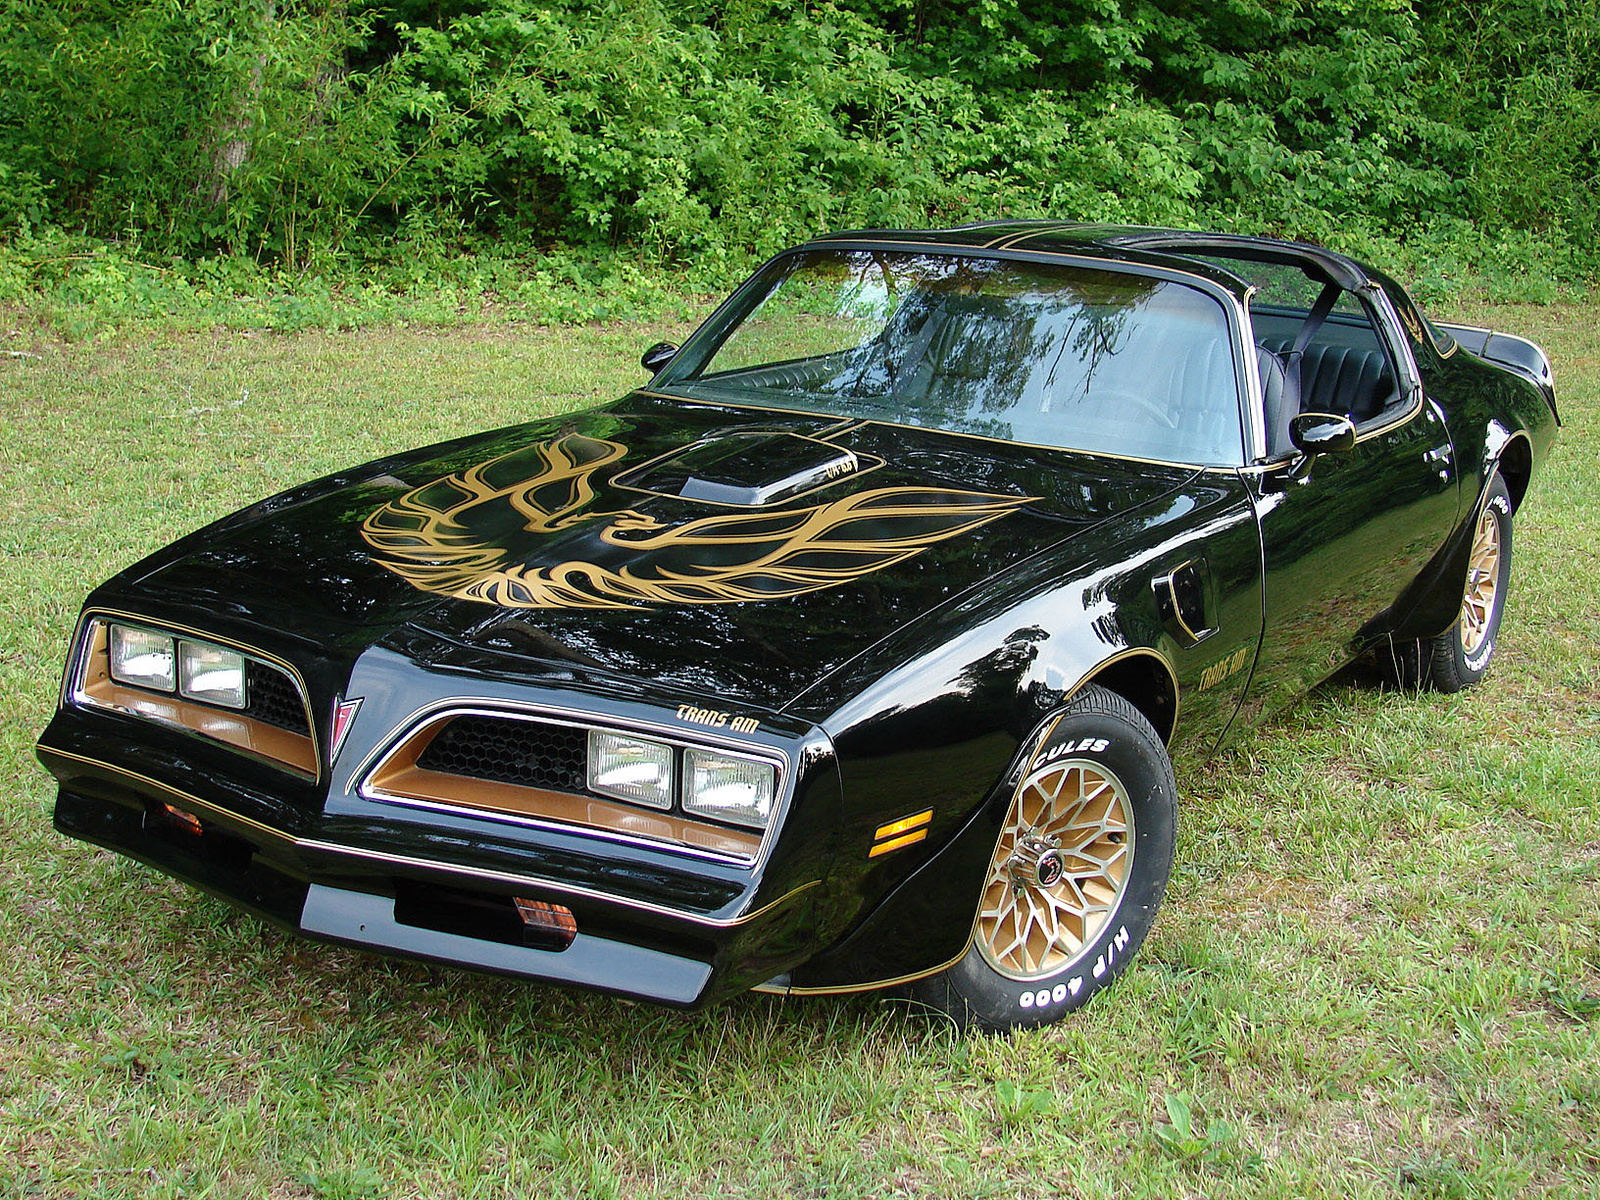 TransAm: It is a car. It does not pretend to be anything else. God Bless you Trans Am!